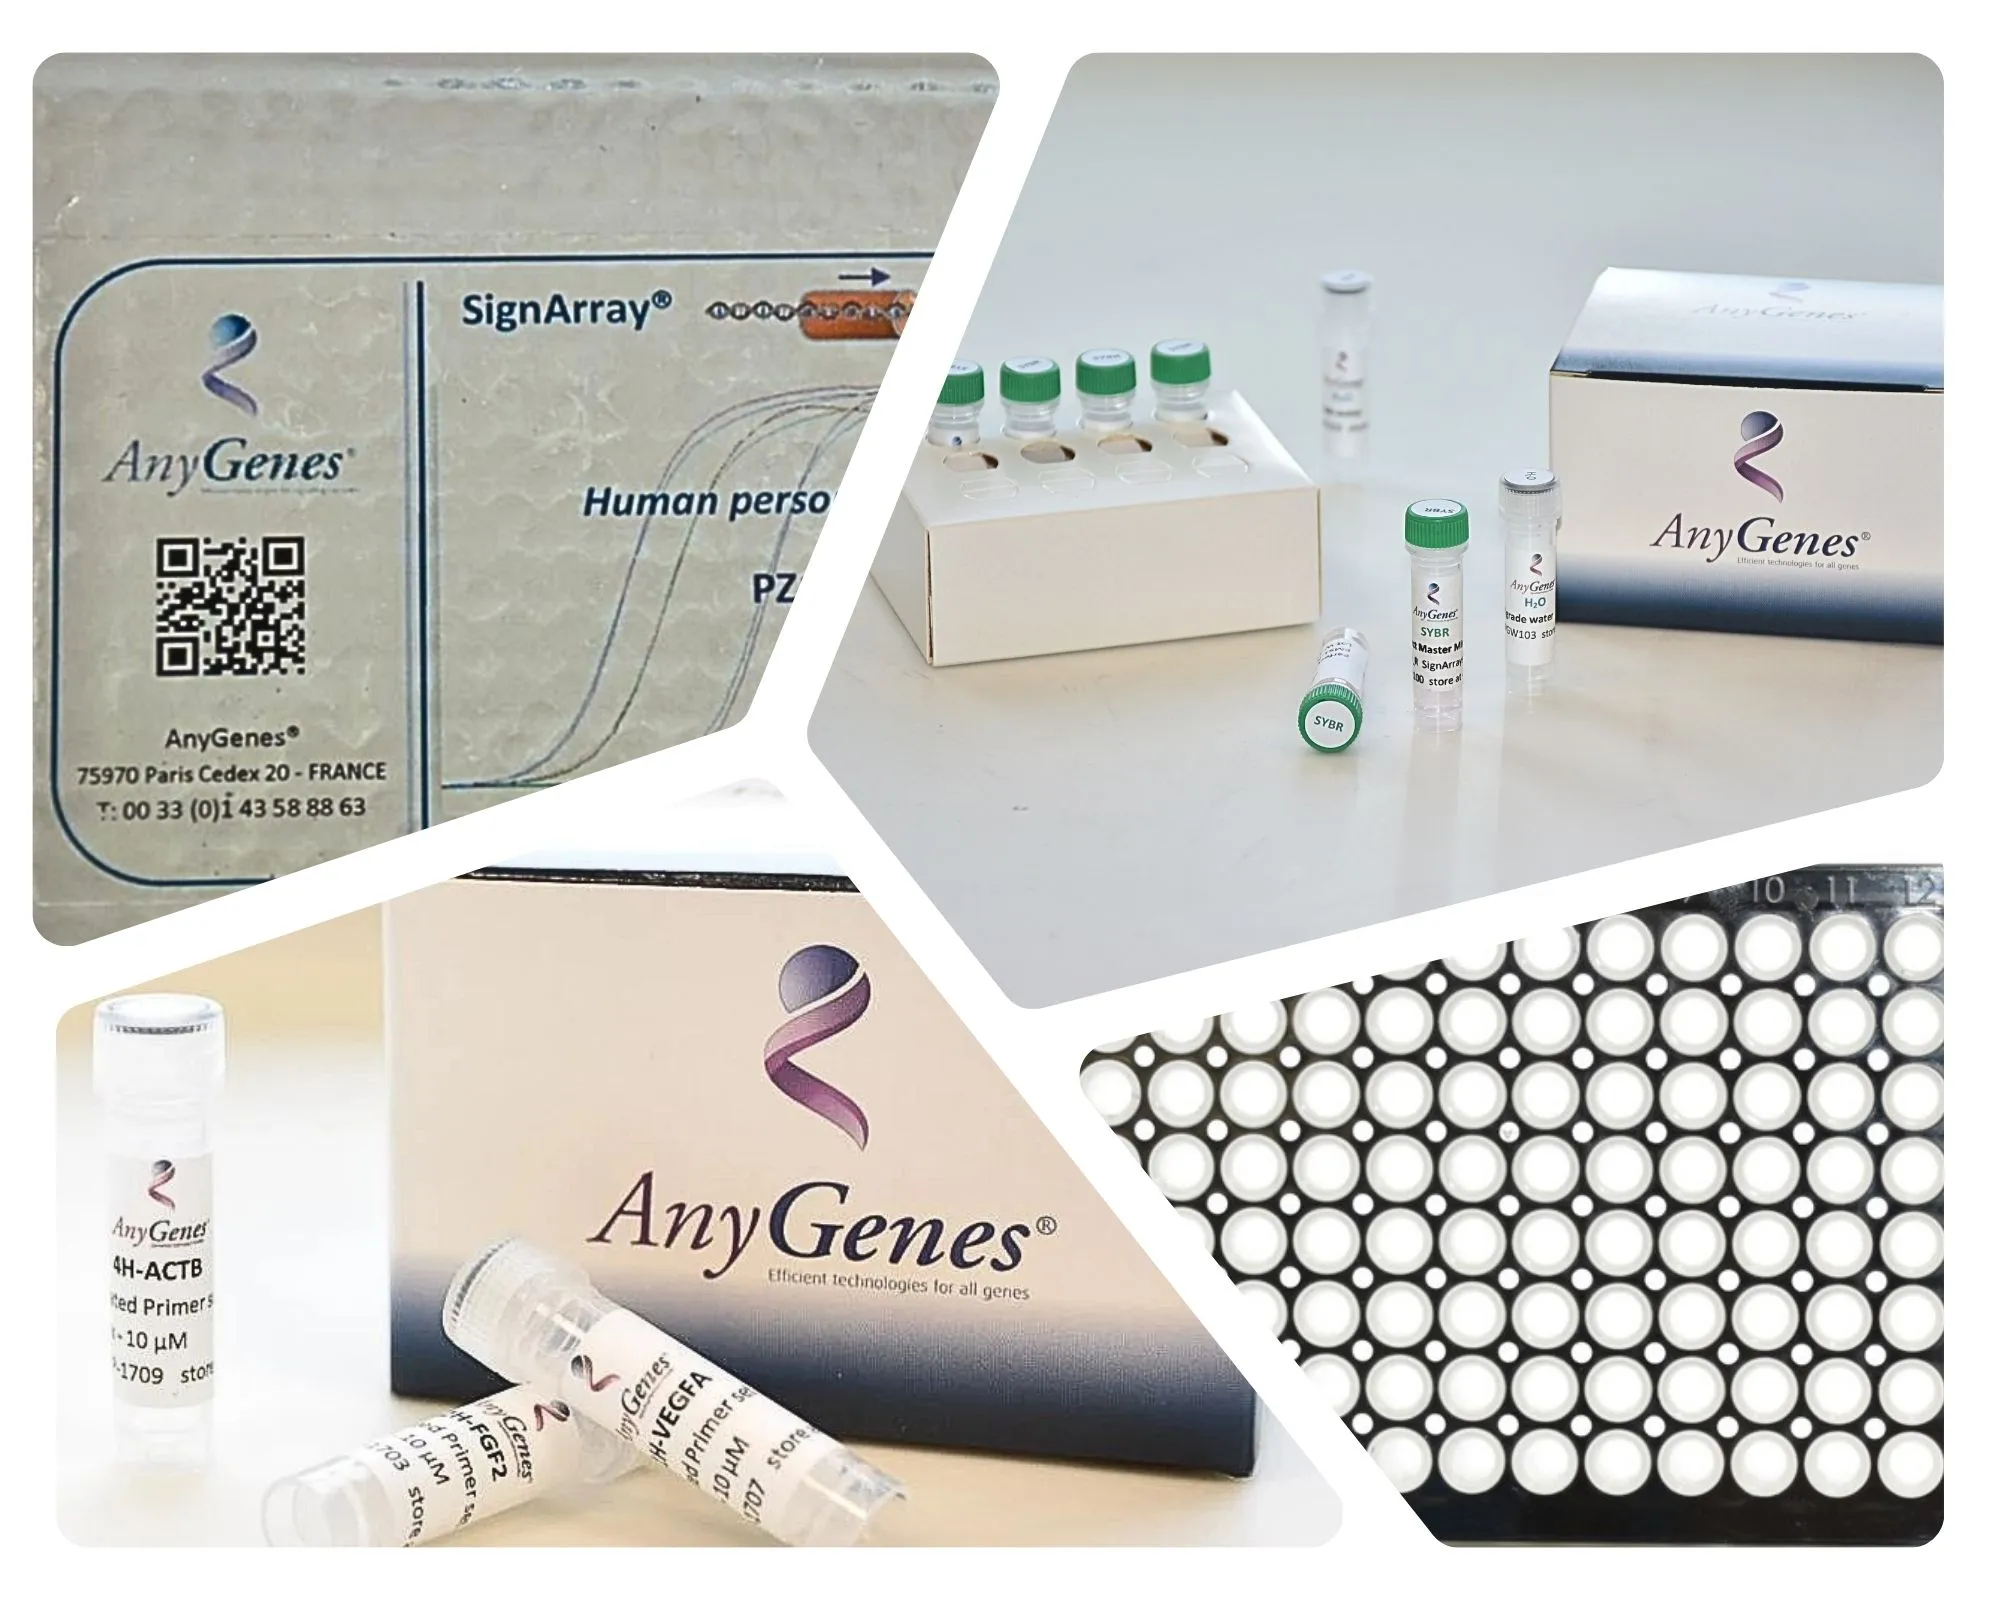 AnyGenes has developed a large catalog of molecular biology reagents and assays dedicated to gene expression, cell signaling and biomarkers profiling